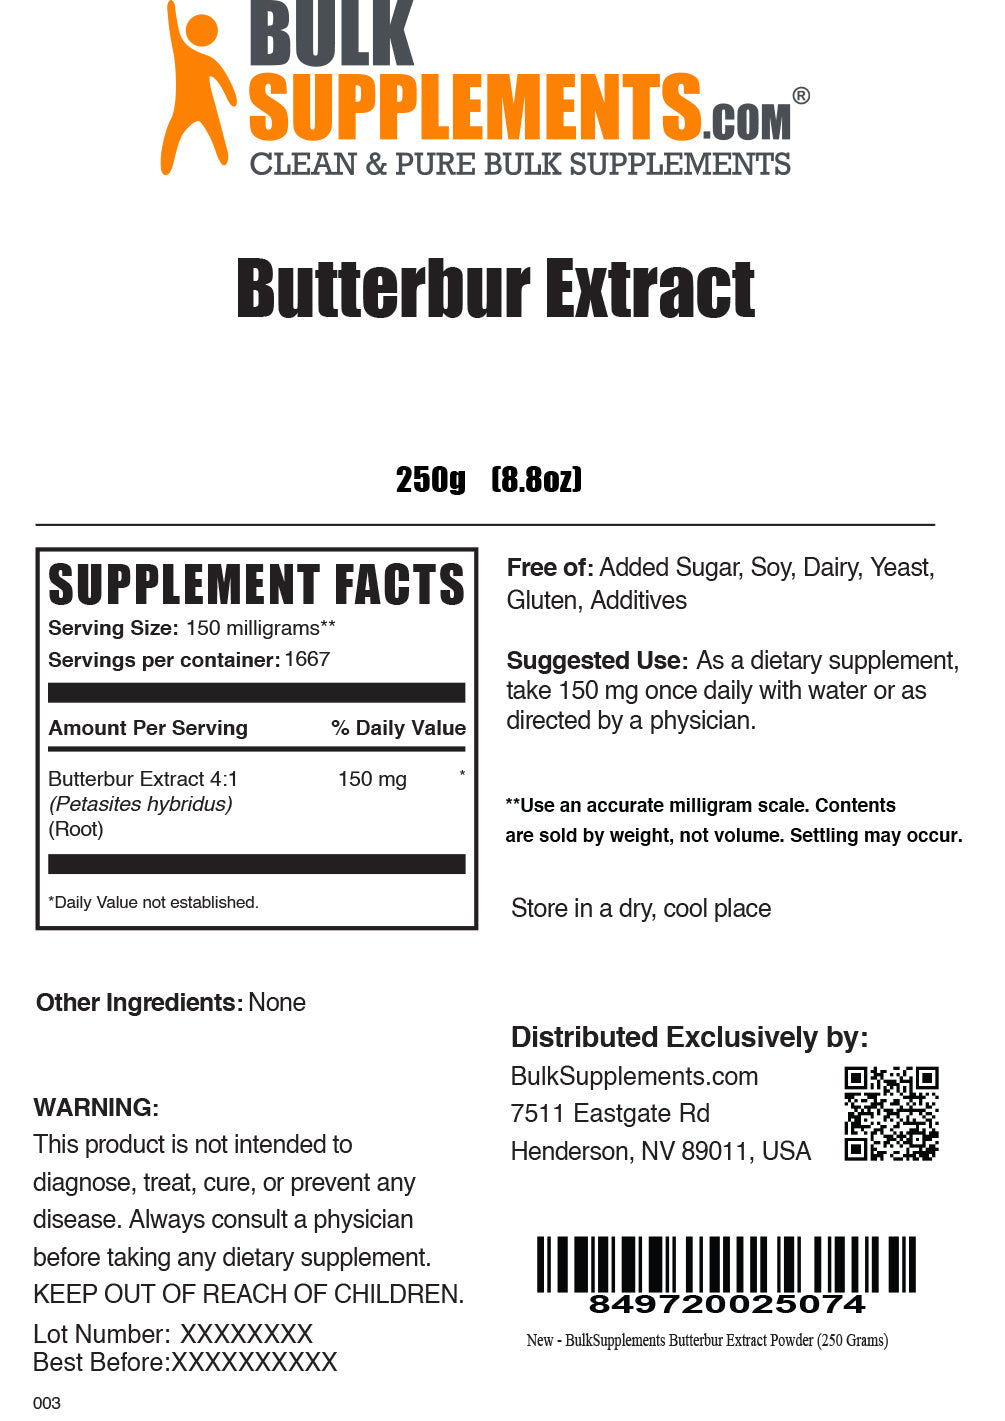 250g of Butterbur extract supplement facts